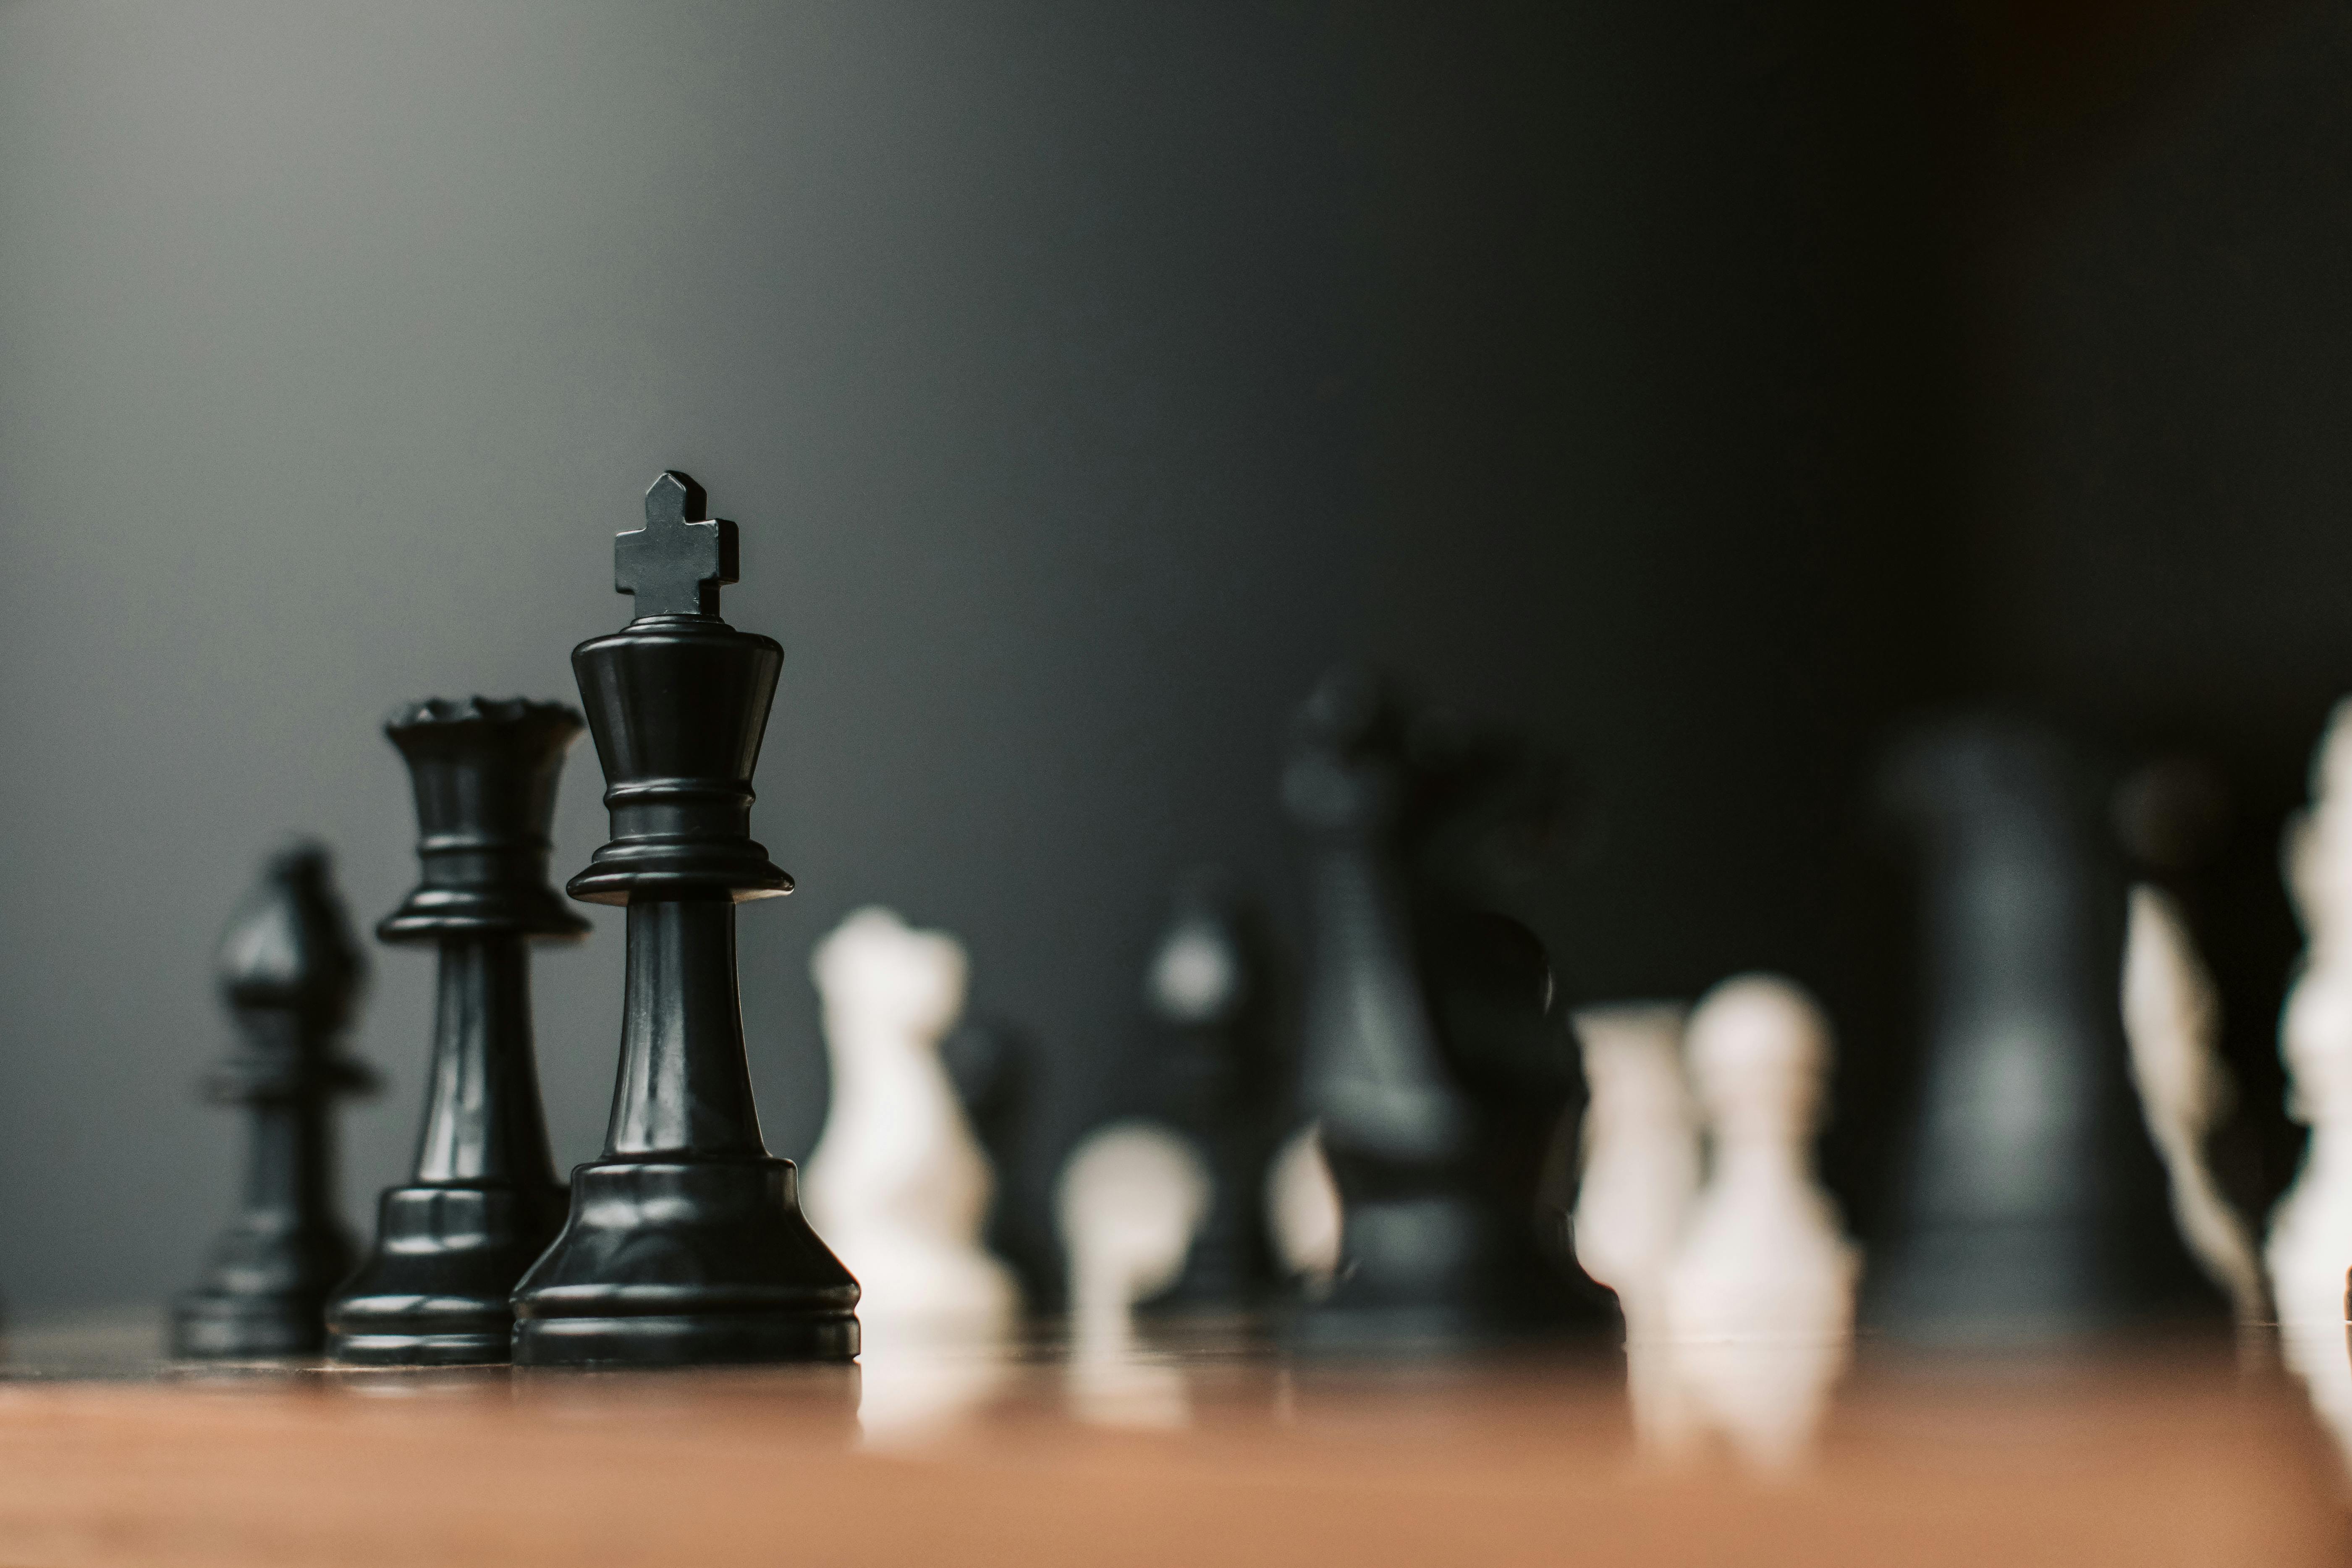 Few Pieces Of A Chess Board On A Black Background, Picture Of Chess Pieces,  Chess, Game Background Image And Wallpaper for Free Download